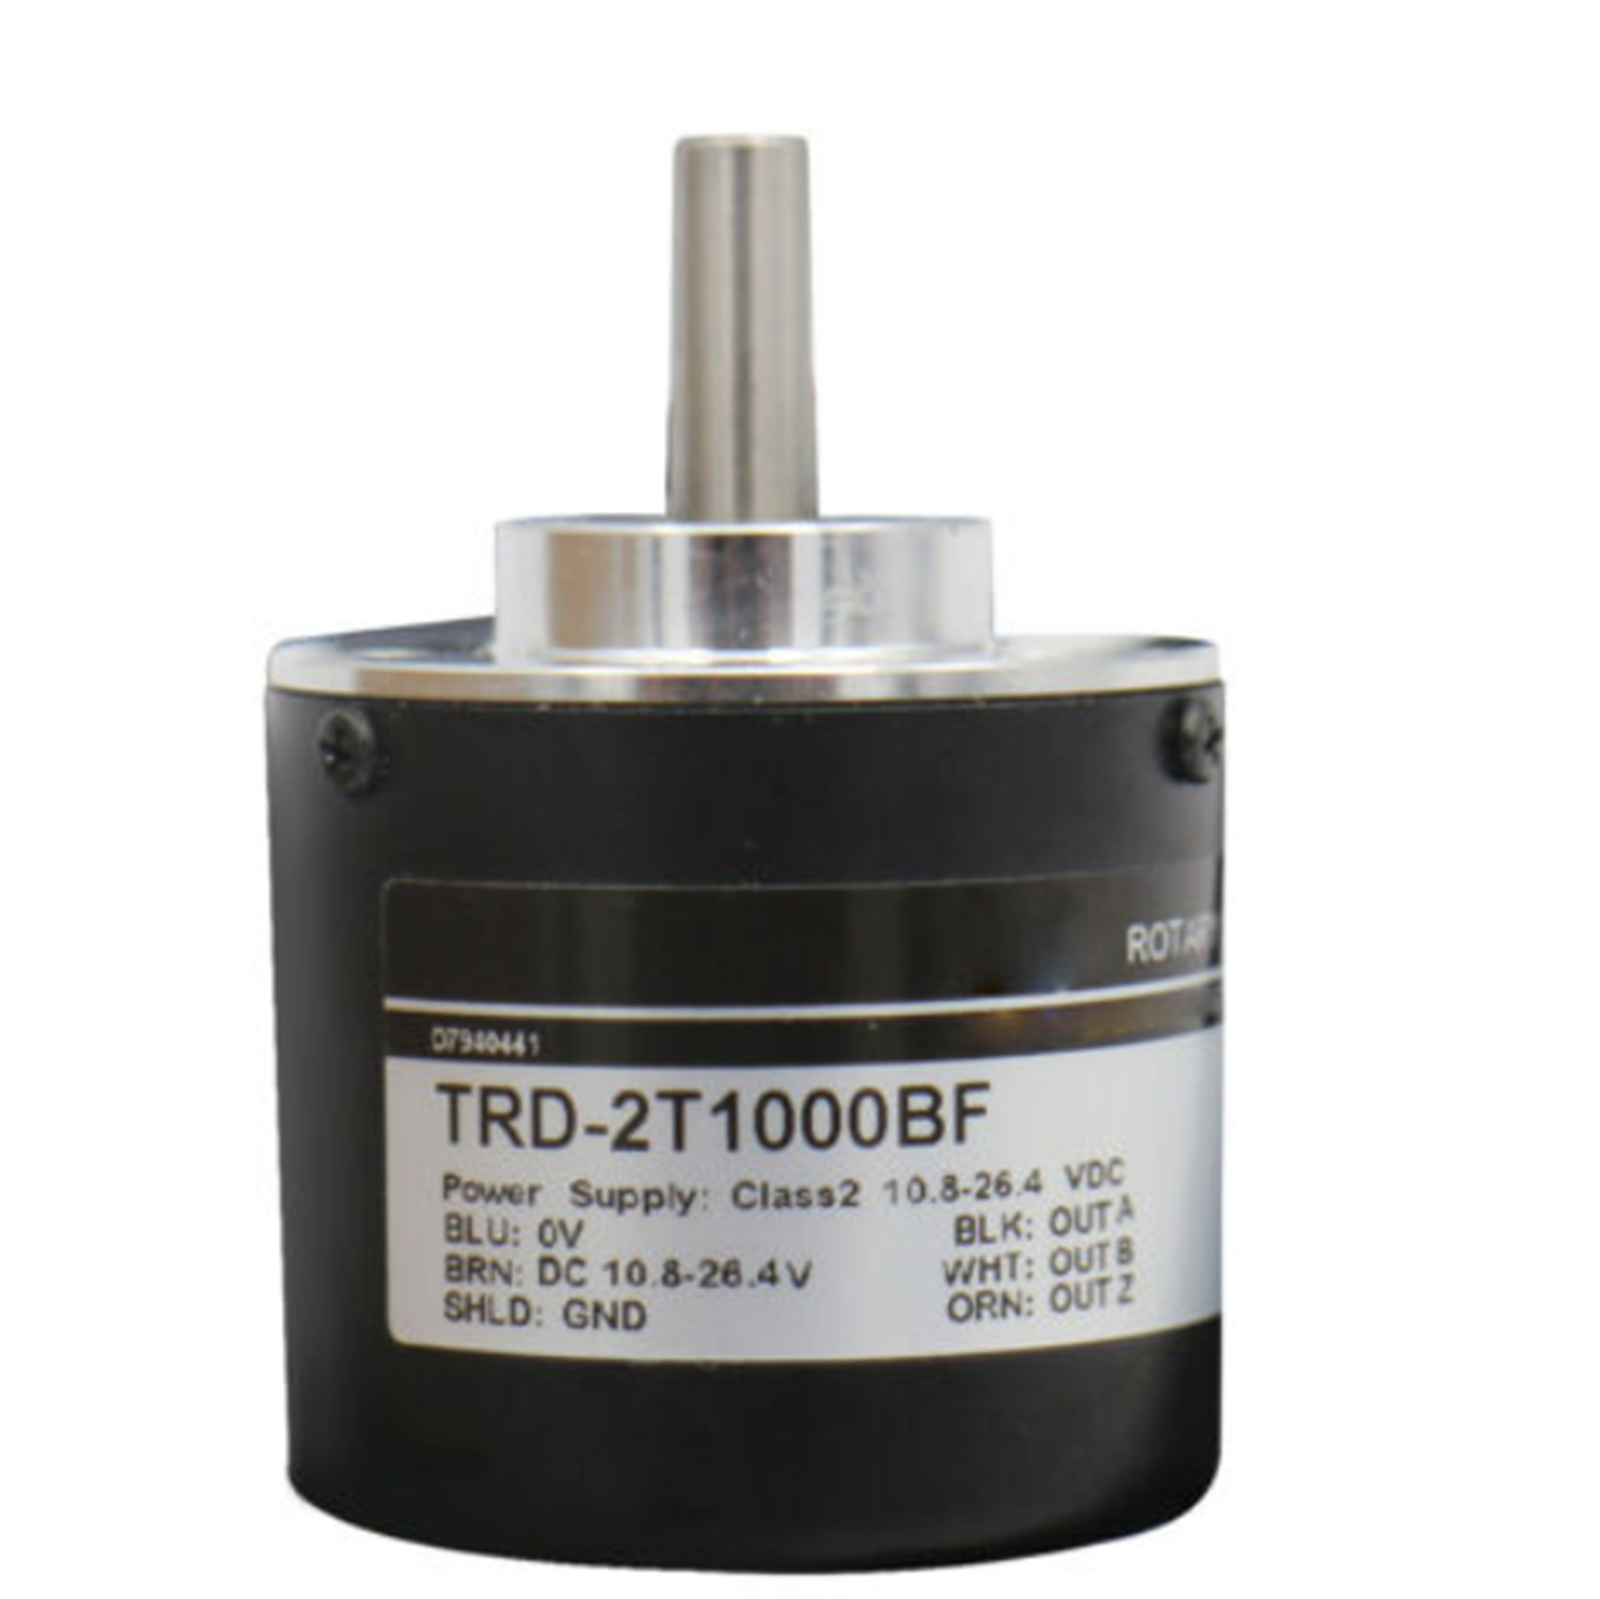 KOYO TRD-2T1000BF INCREMENTAL SHAFT ROTARY ENCODER FOR INDUSTRY USE